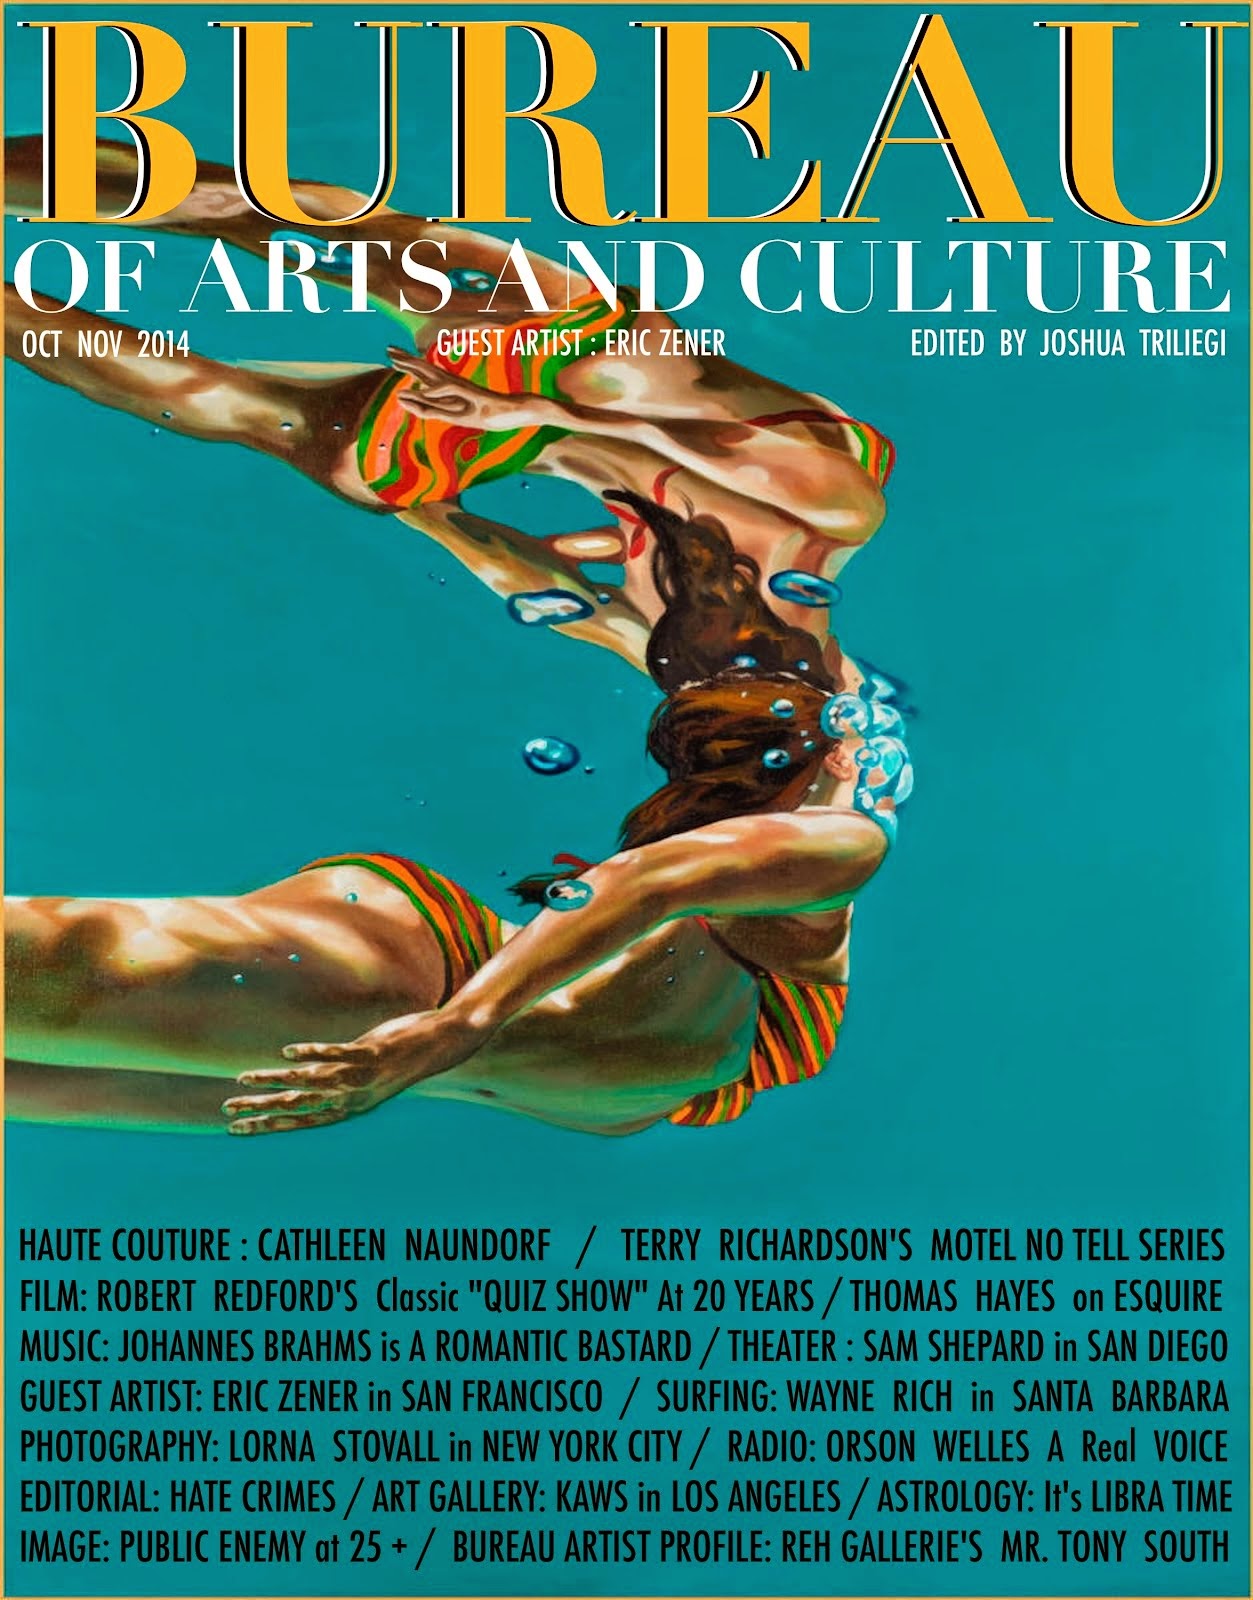 TAP FREE Edition of BUREAU of ARTS and Culture MAGAZINE ERIC ZENER GUEST ARTIST